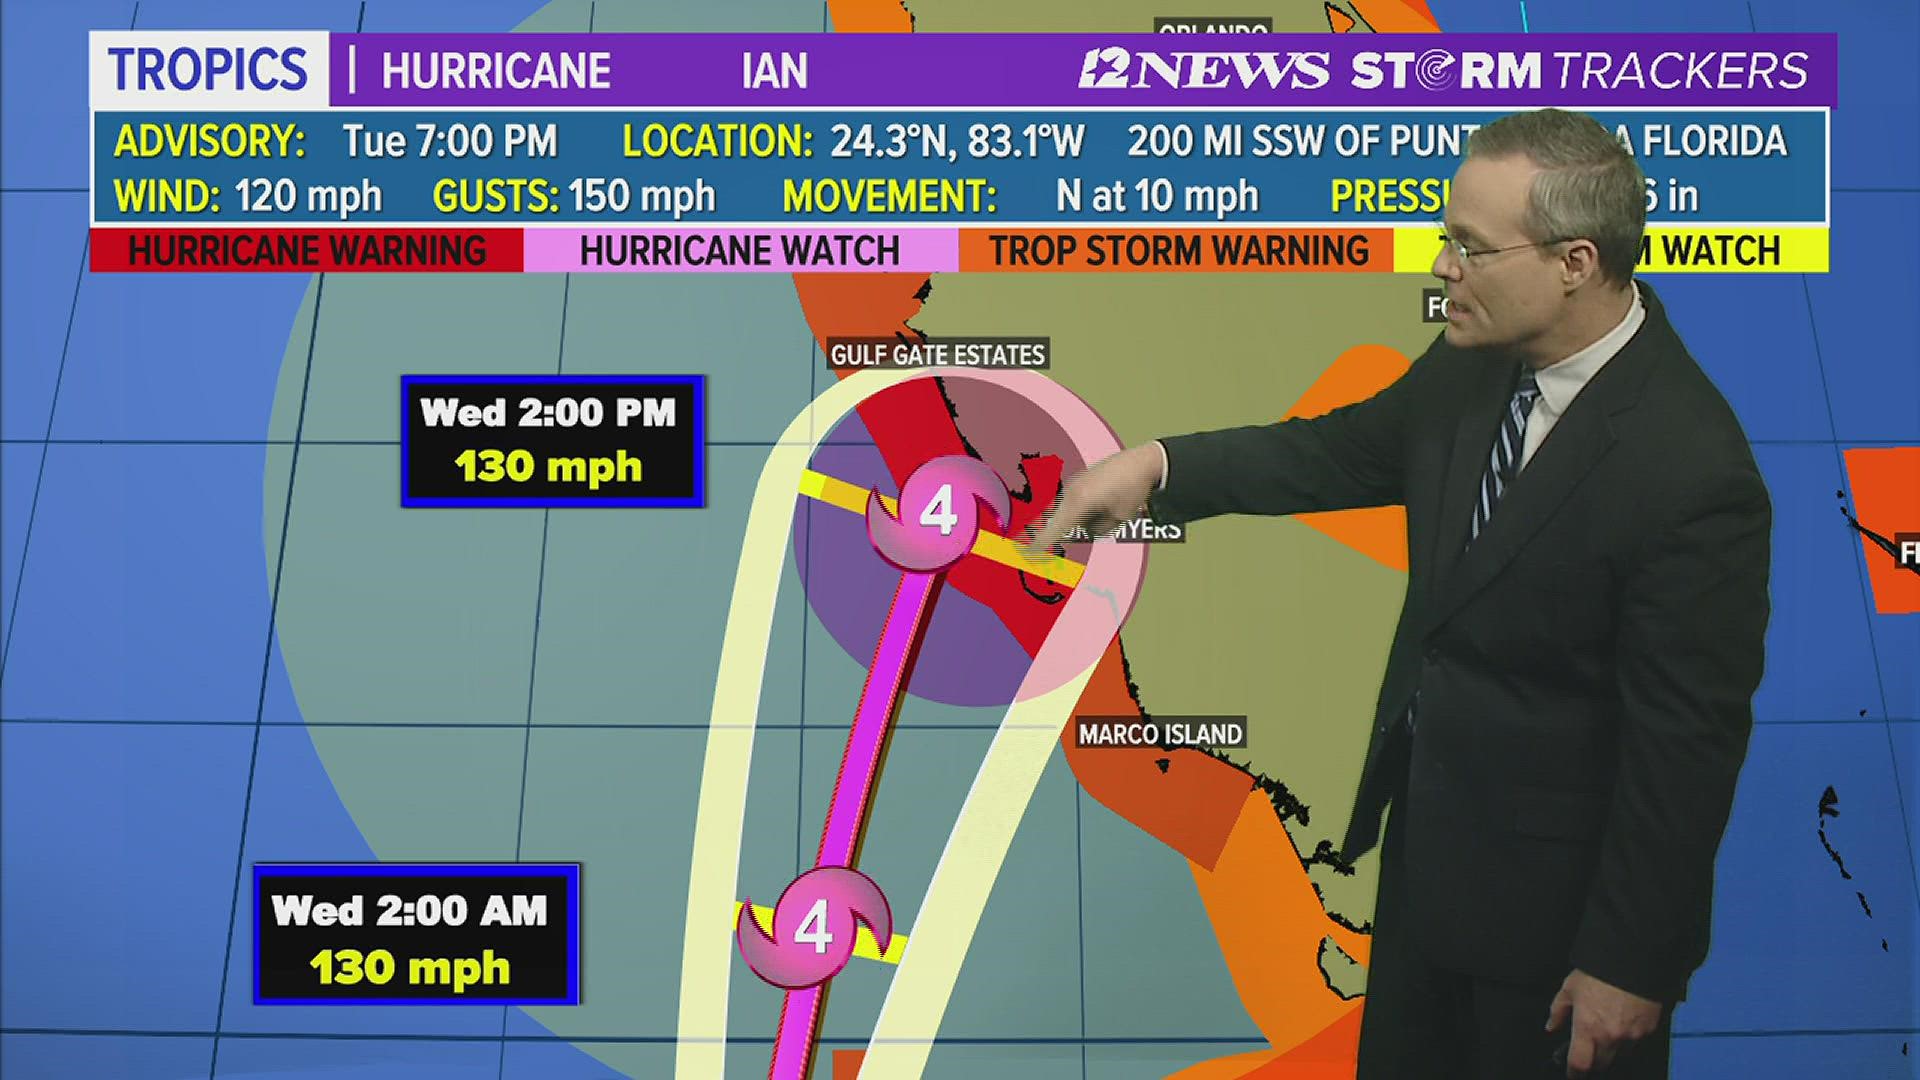 Ian has winds of 120 mph and is 100 miles to southwest of Key West, Florida.